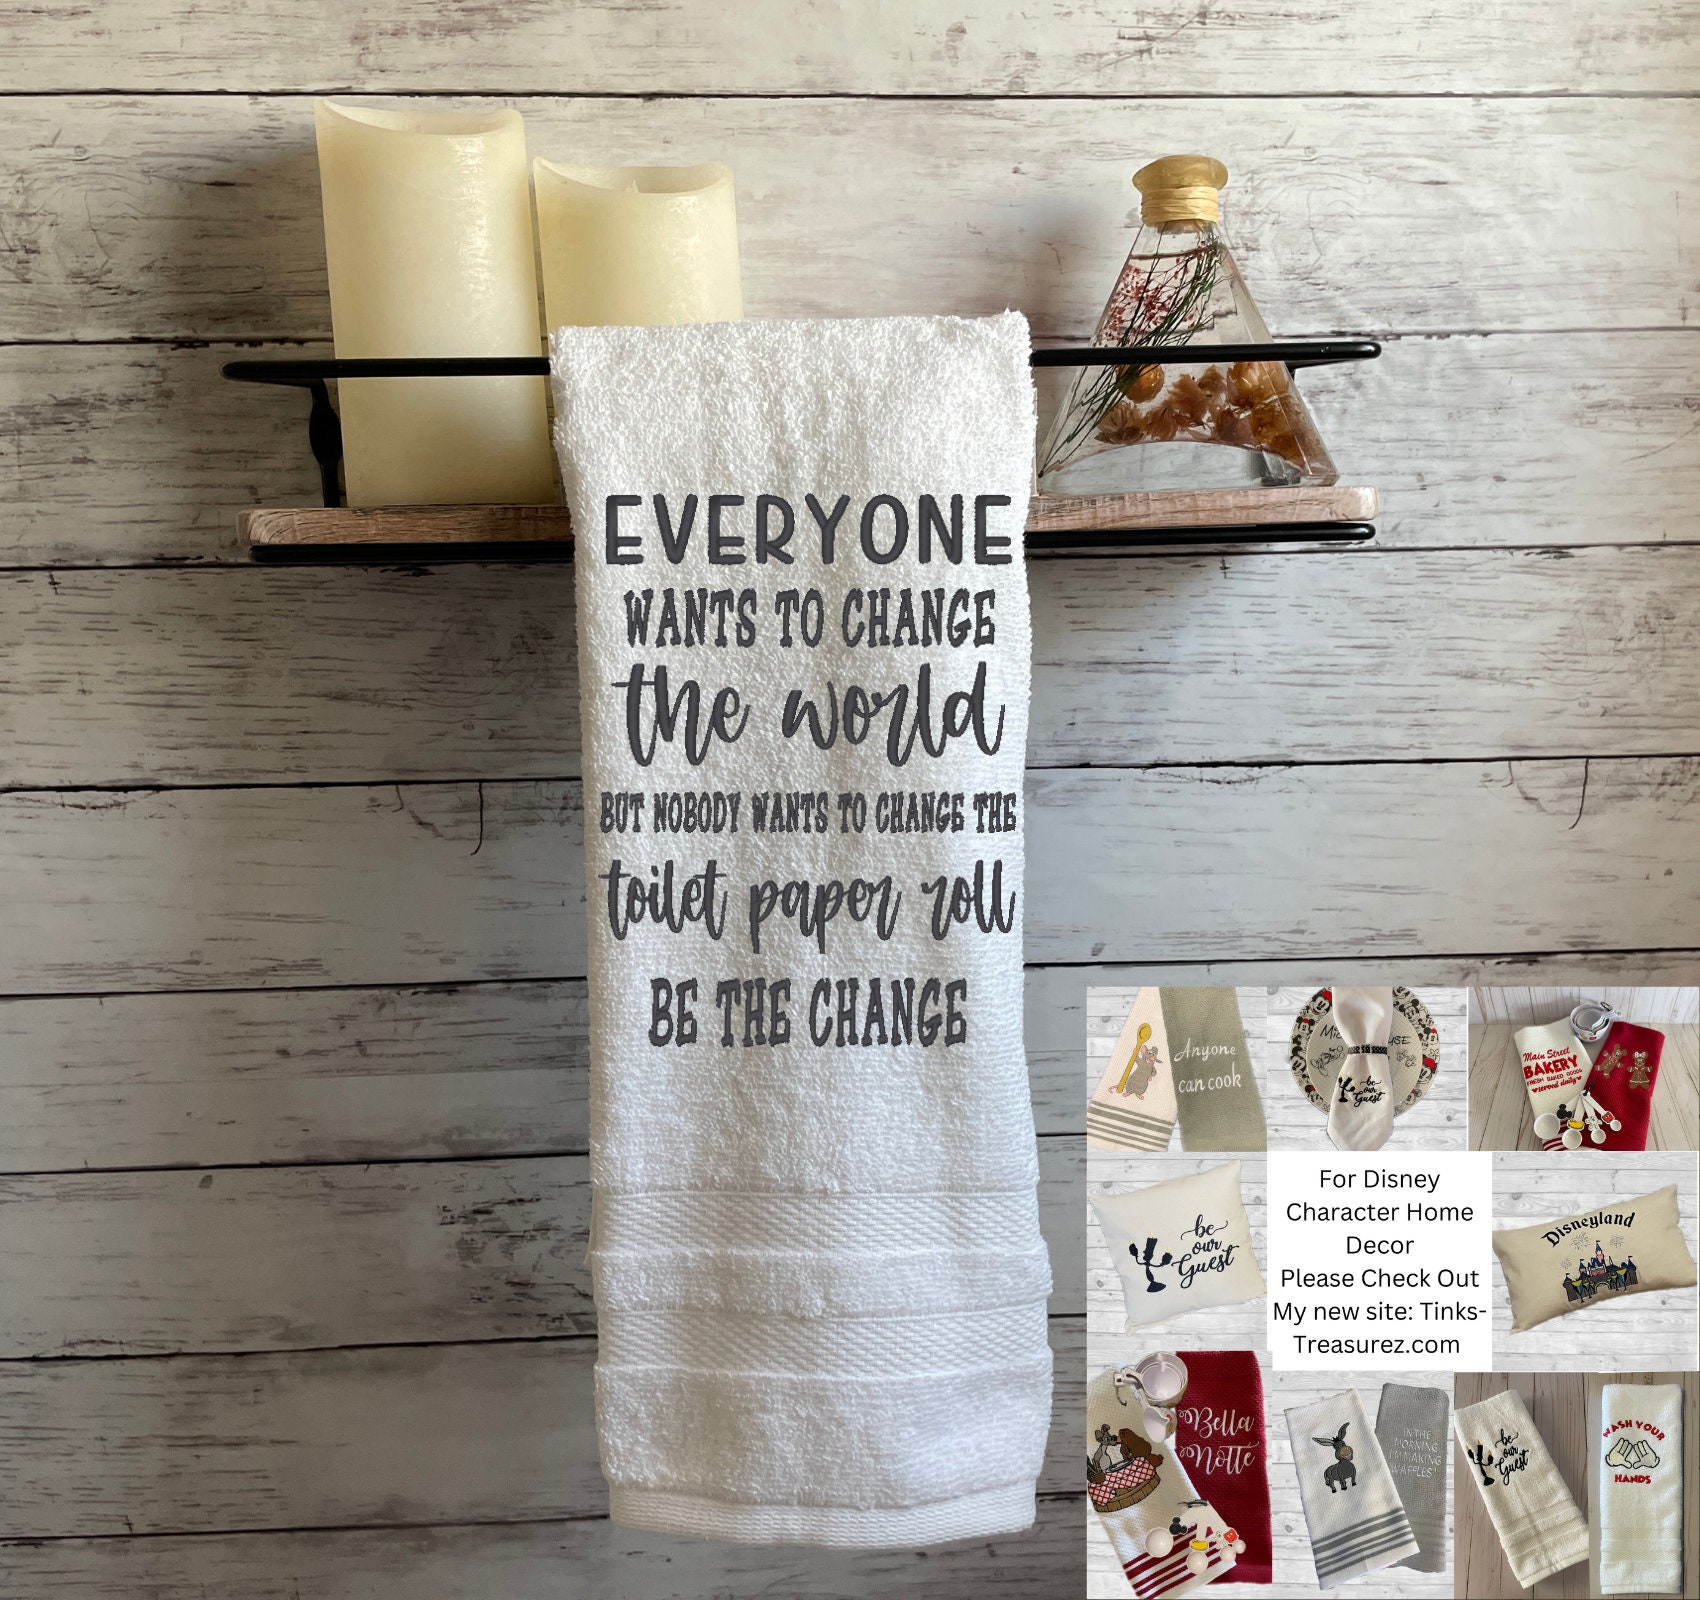 2 Pieces Funny Hand Towels with Sayings Hello Sweet Cheeks Wash Your Hands  Bathroom Hand Towels Rustic Cute Dish Kitchen Towels for Bathroom Home